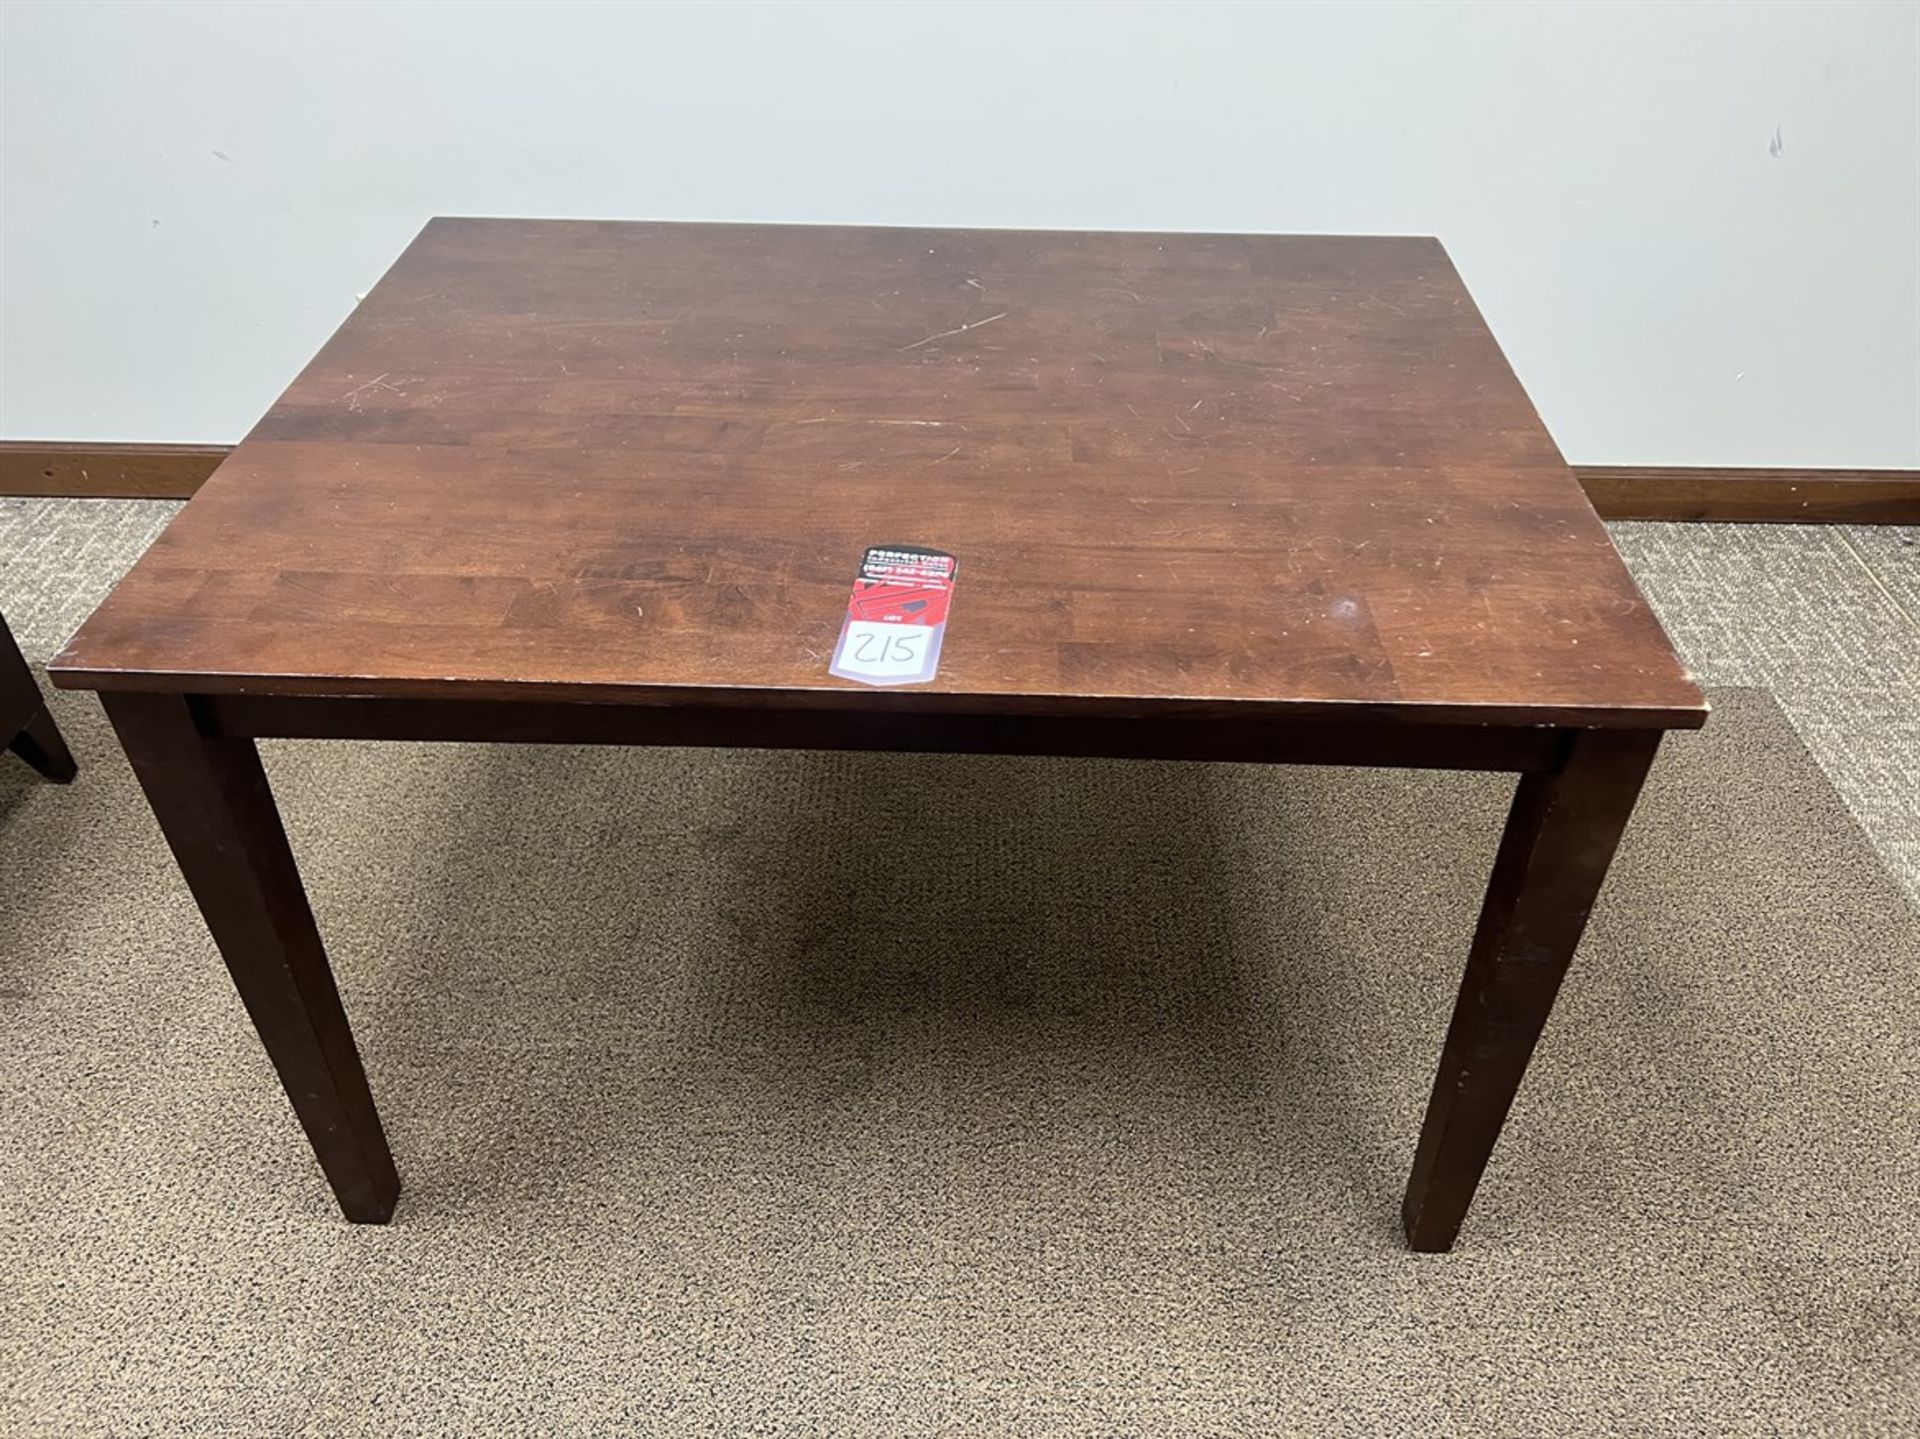 Wood Table, 36" x 48" w/ End Table - Image 2 of 3